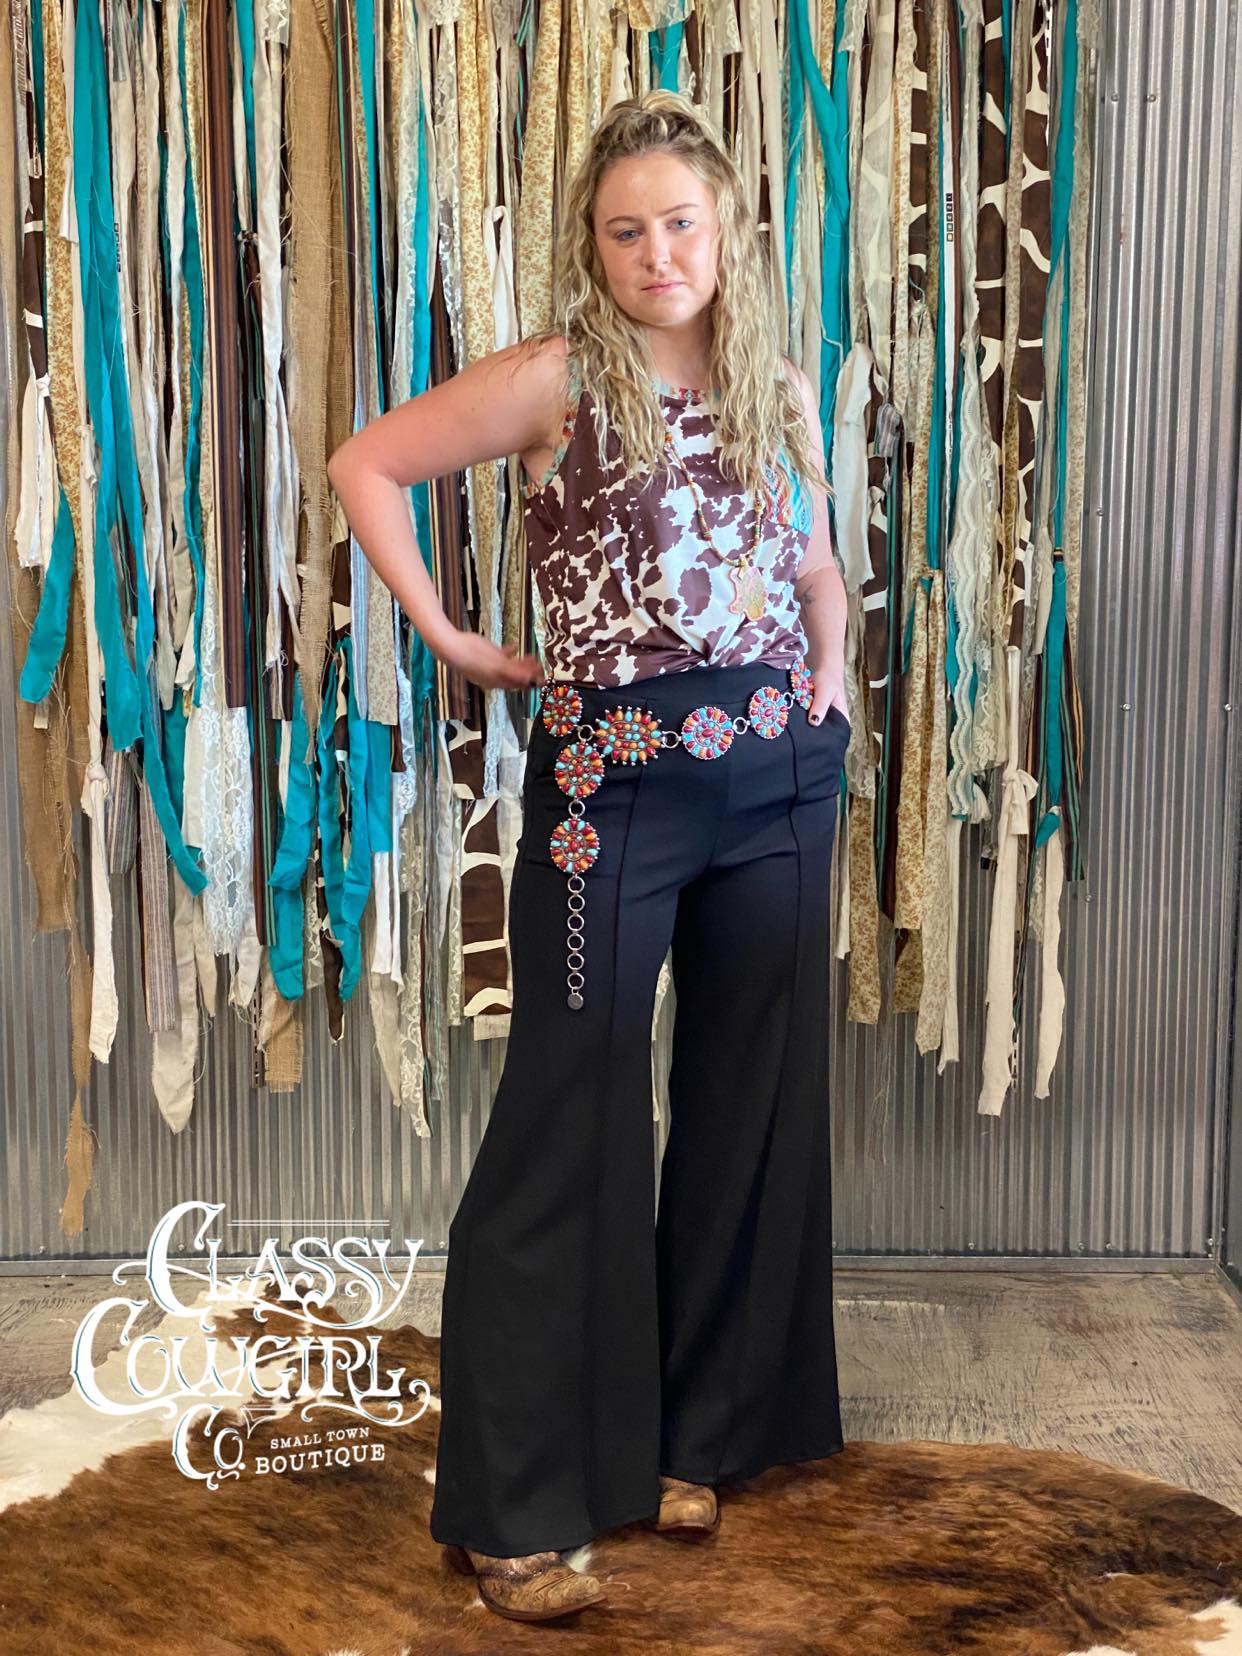 Black Wide Leg Dress Pants with Pockets – Classy Cowgirl Co.